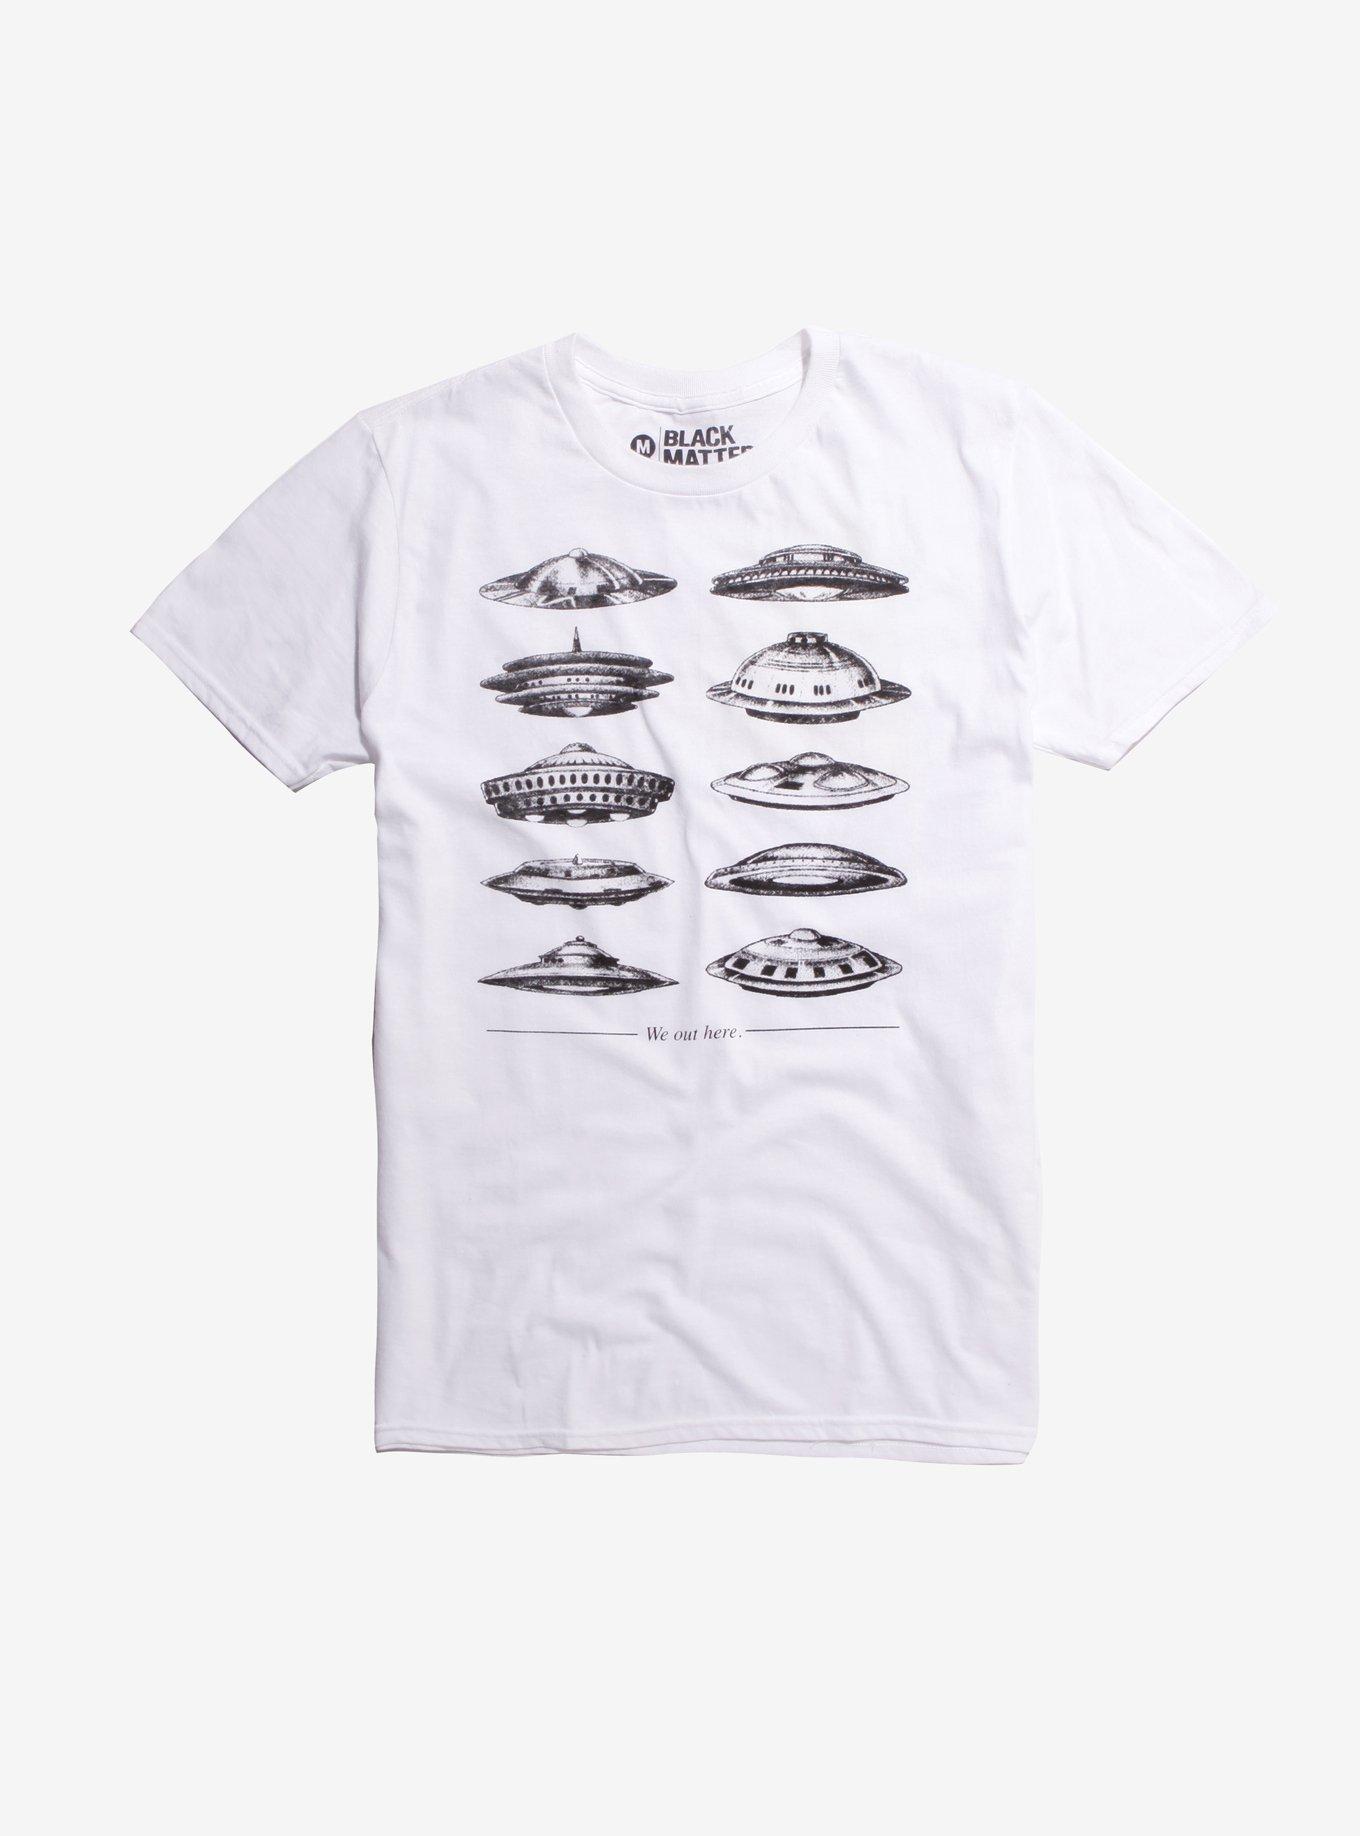 We Out Here UFO T-Shirt Hot Topic Exclusive, WHITE, hi-res